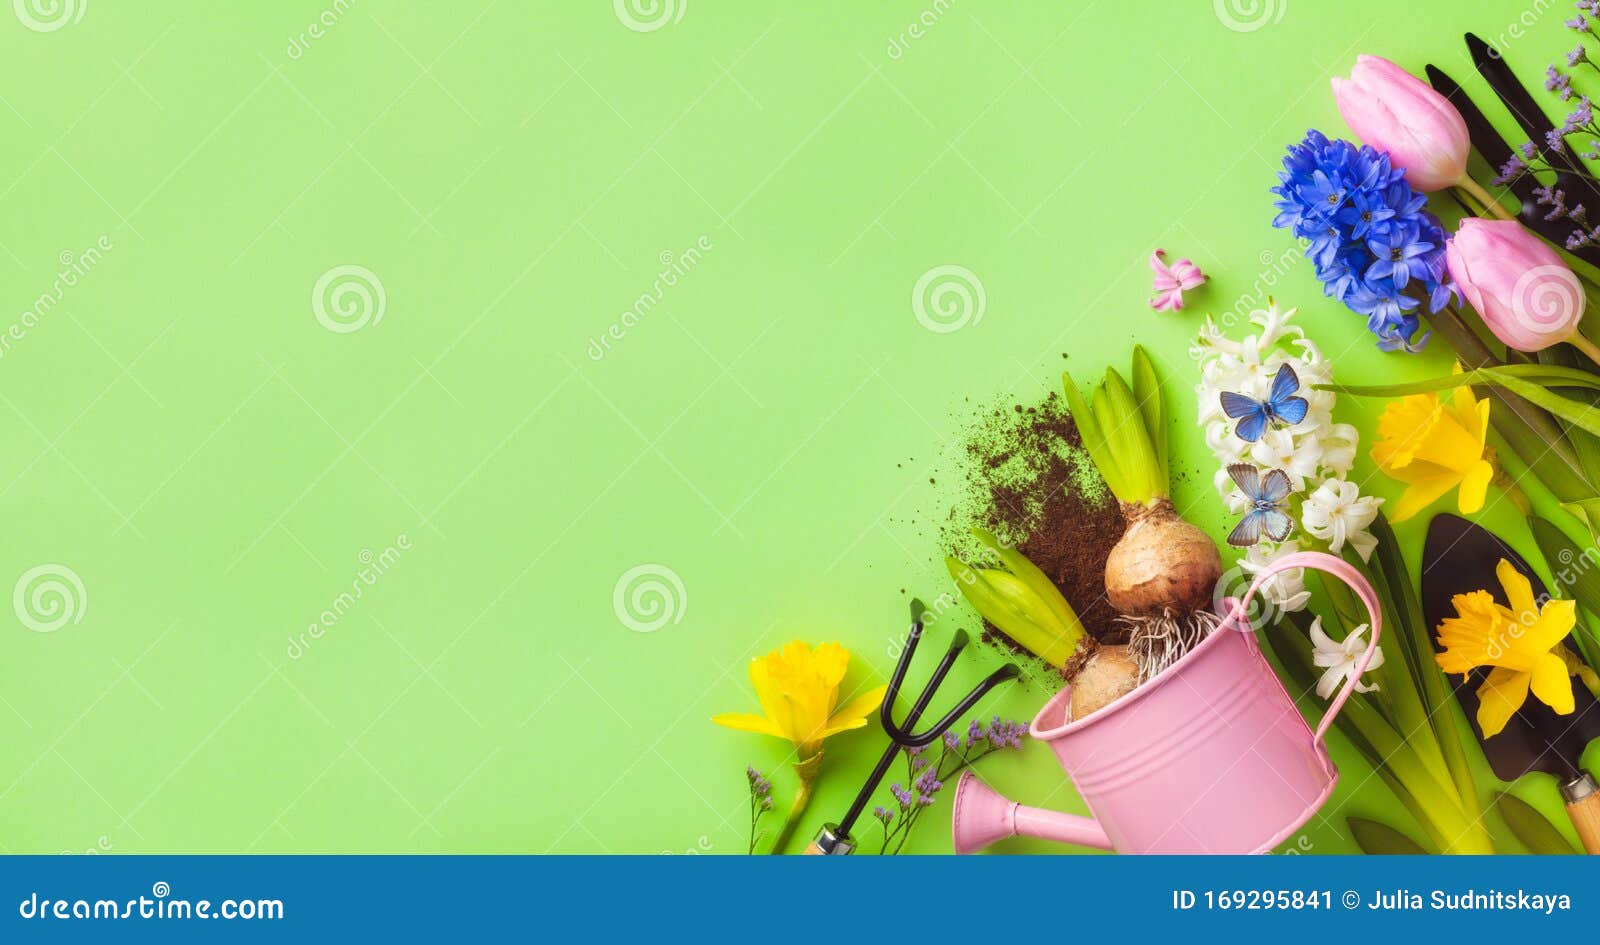 beautiful springtime background with gardening tools, colorful spring flowers and butterflies. top view